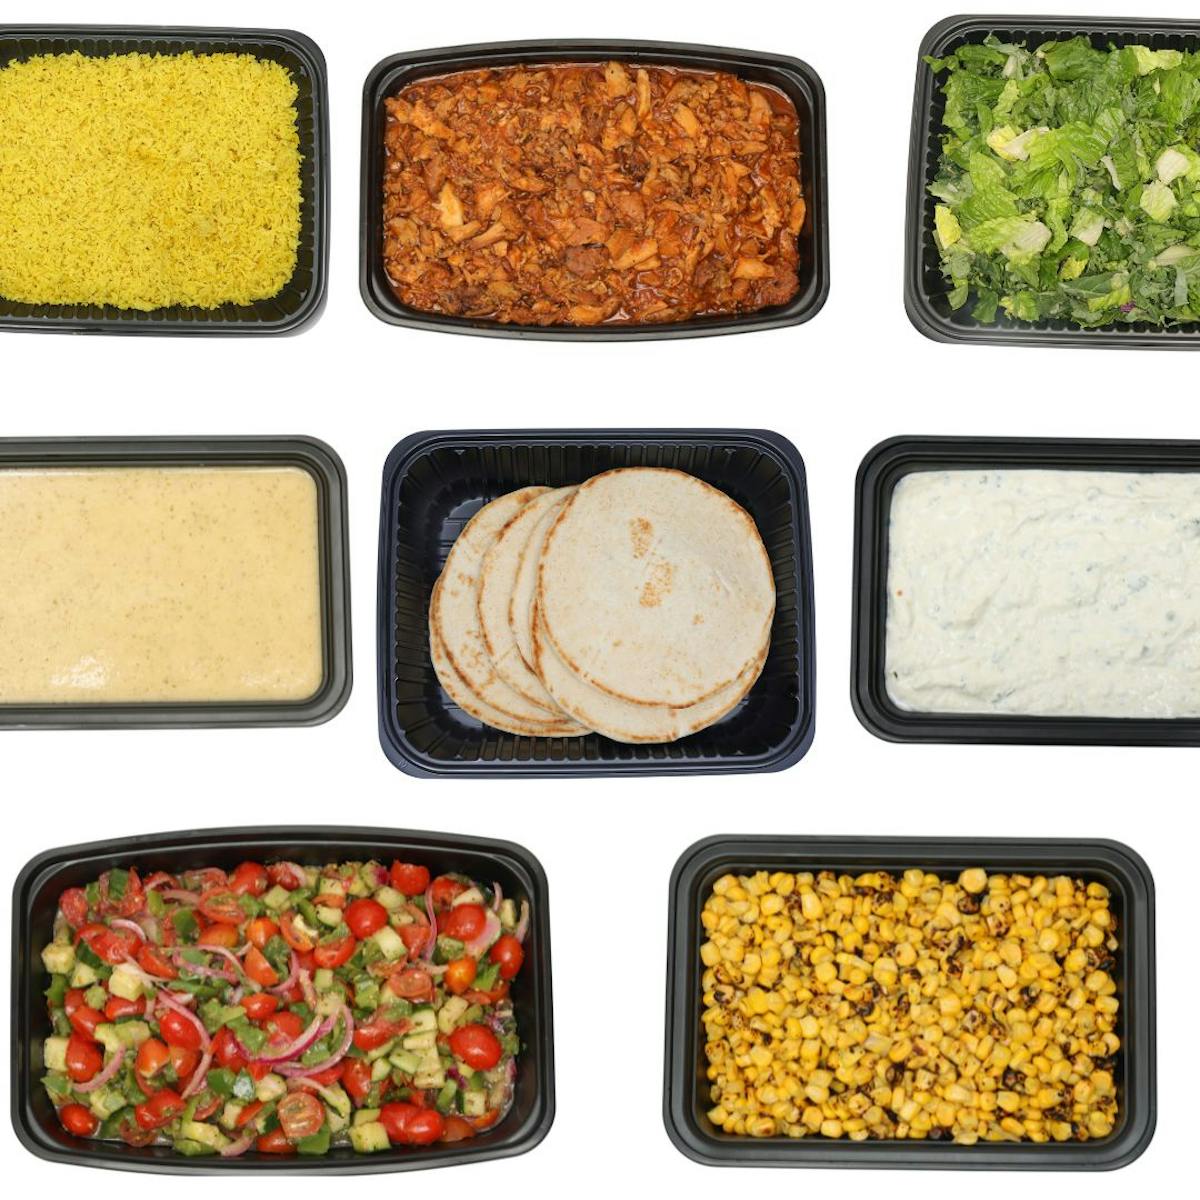 a tray filled with different types of food